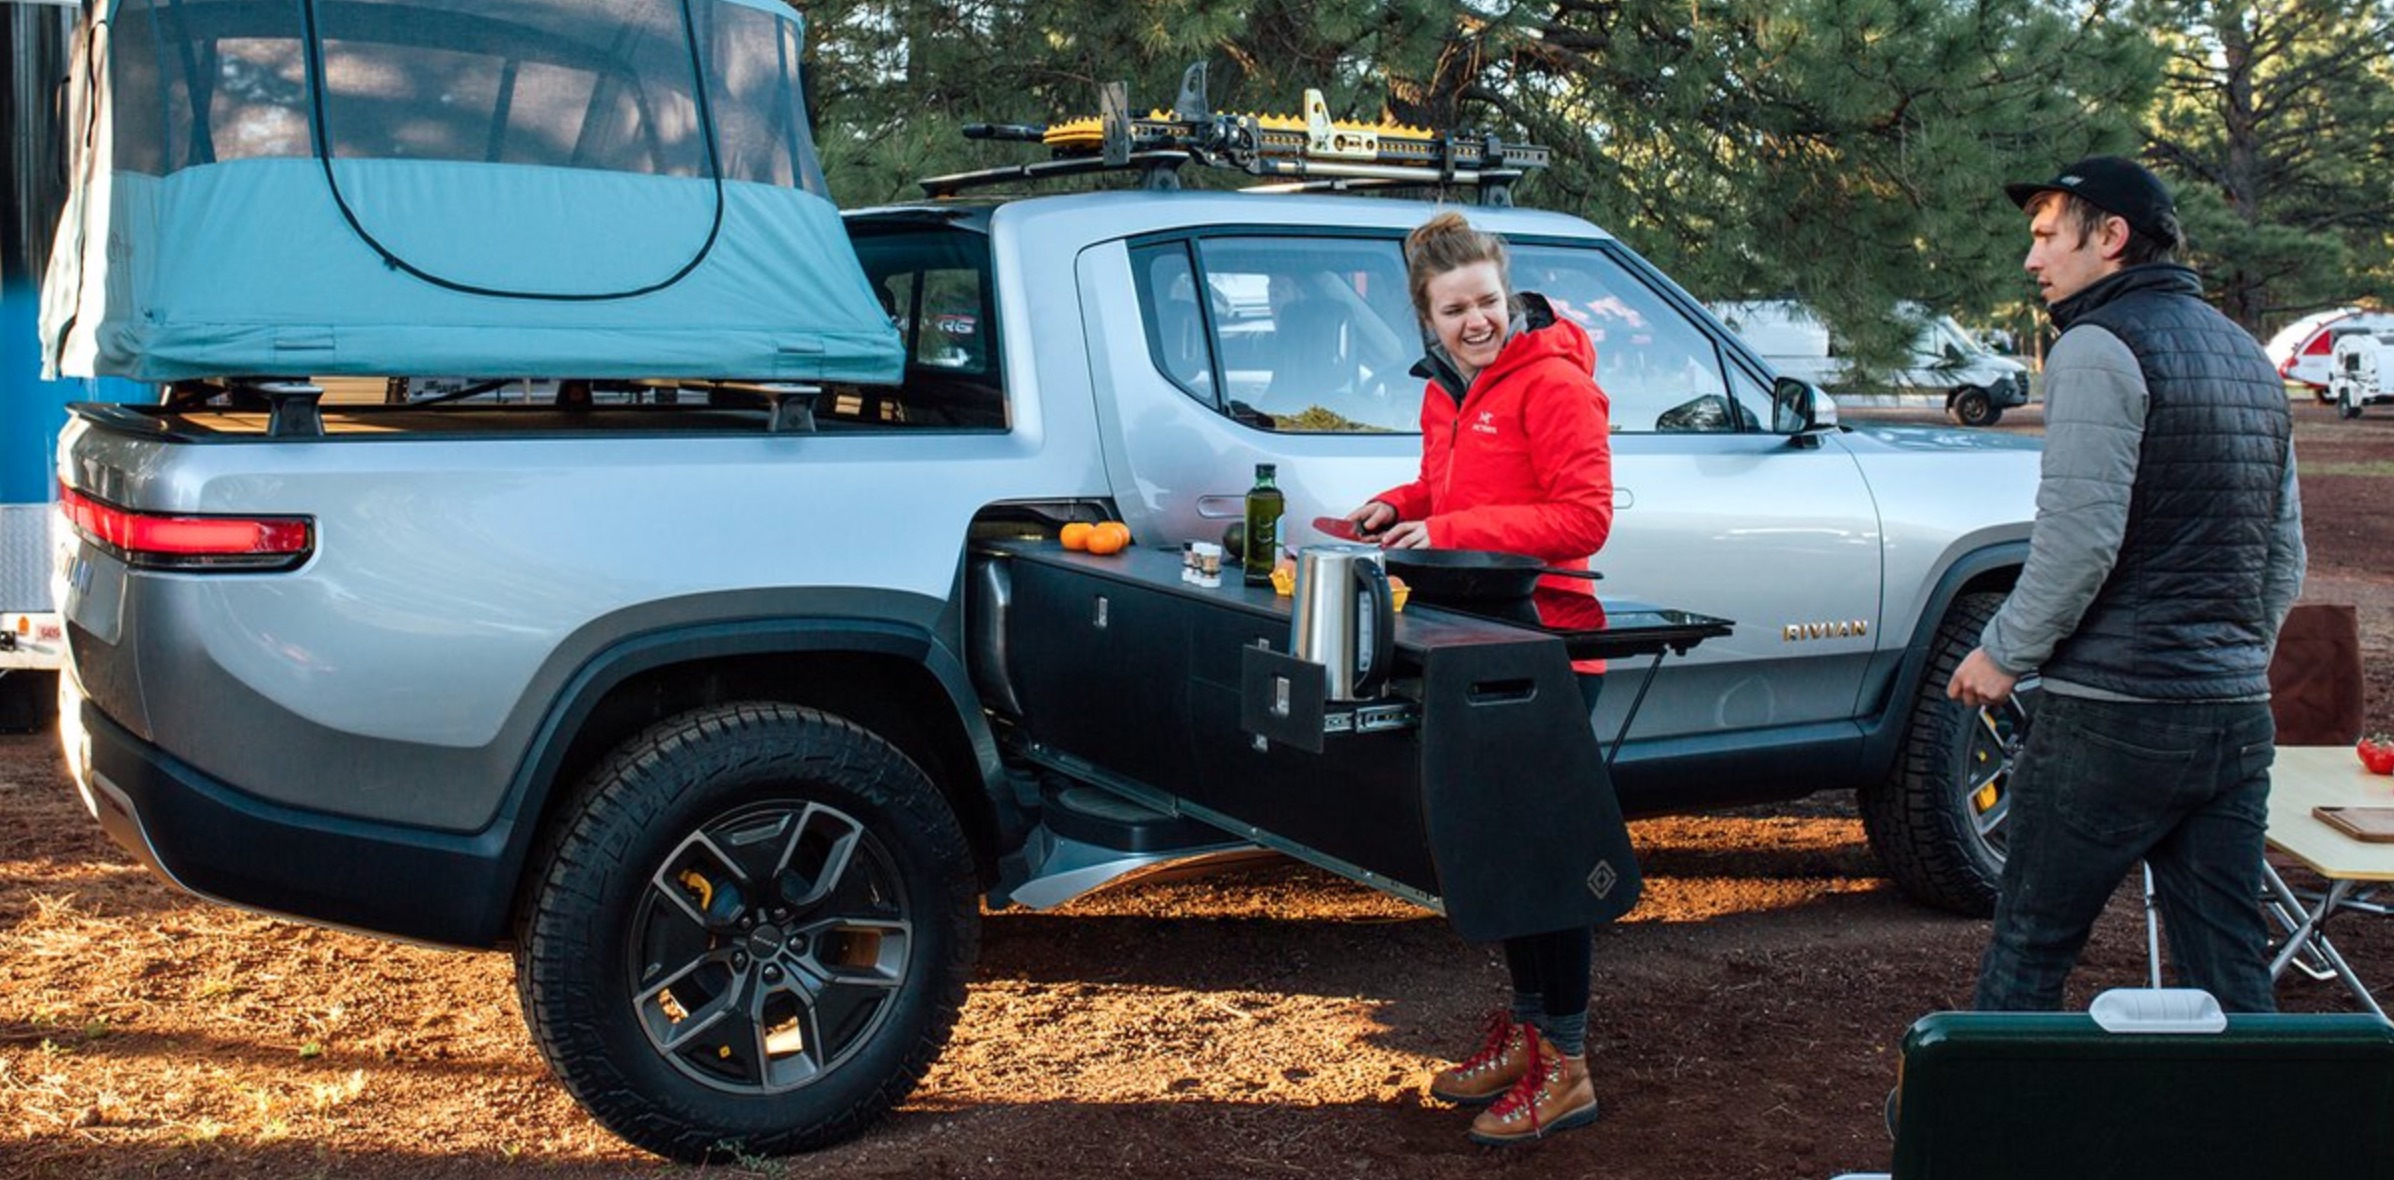 Rivian unveils camper version of its R1T electric pickup truck with